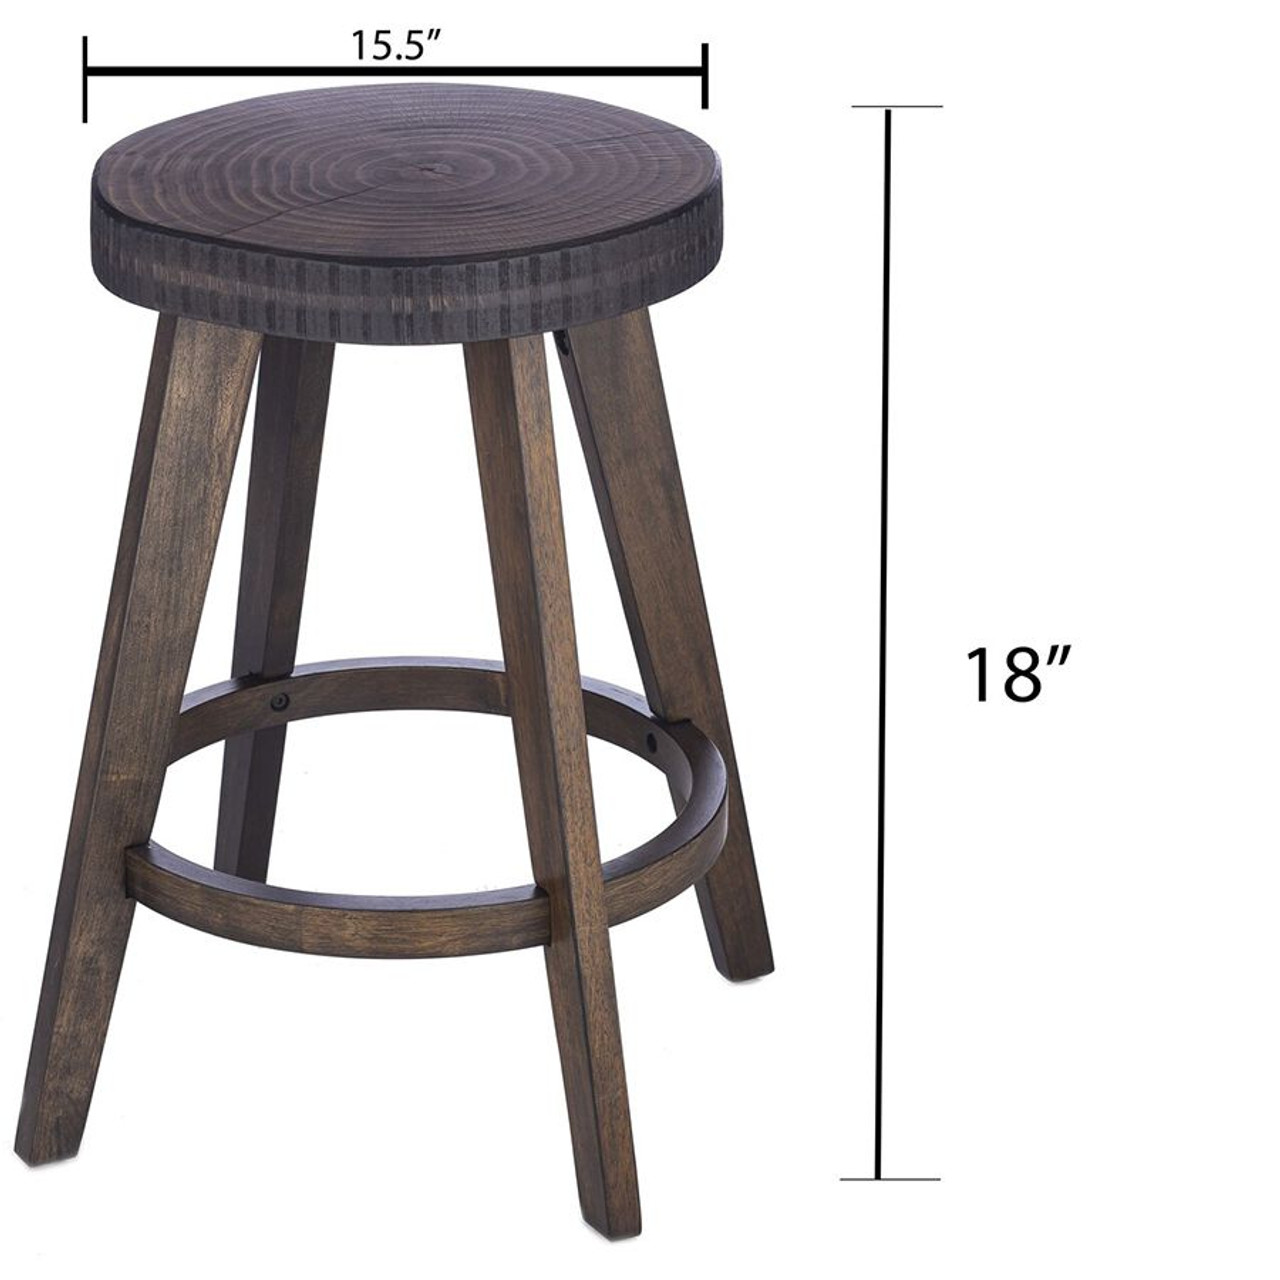 Set of 2 Barstools Counter & Bar Height 